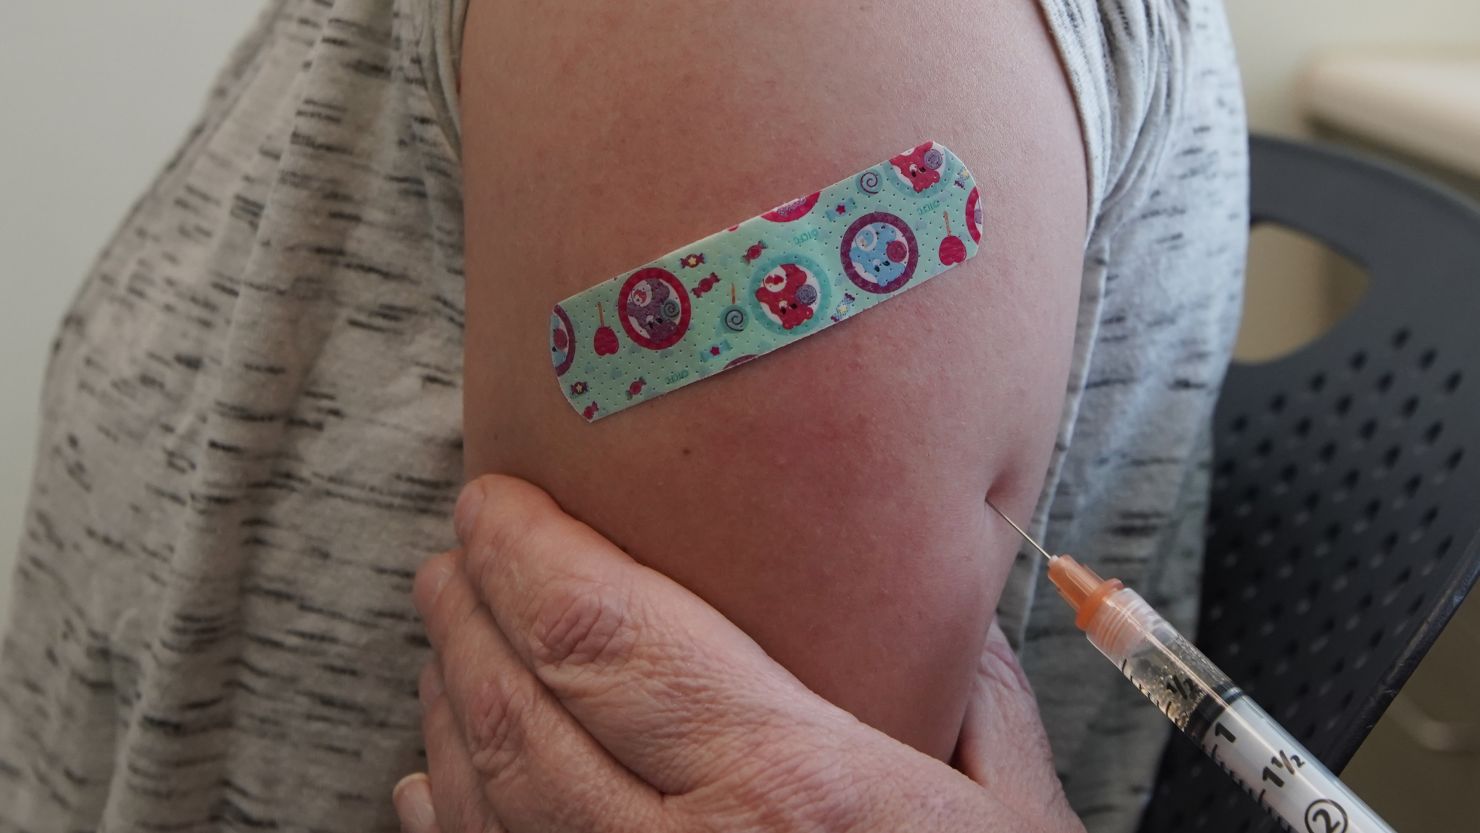 Proponents of the Ohio bill say they are leery of the safety and efficacy of vaccinations.